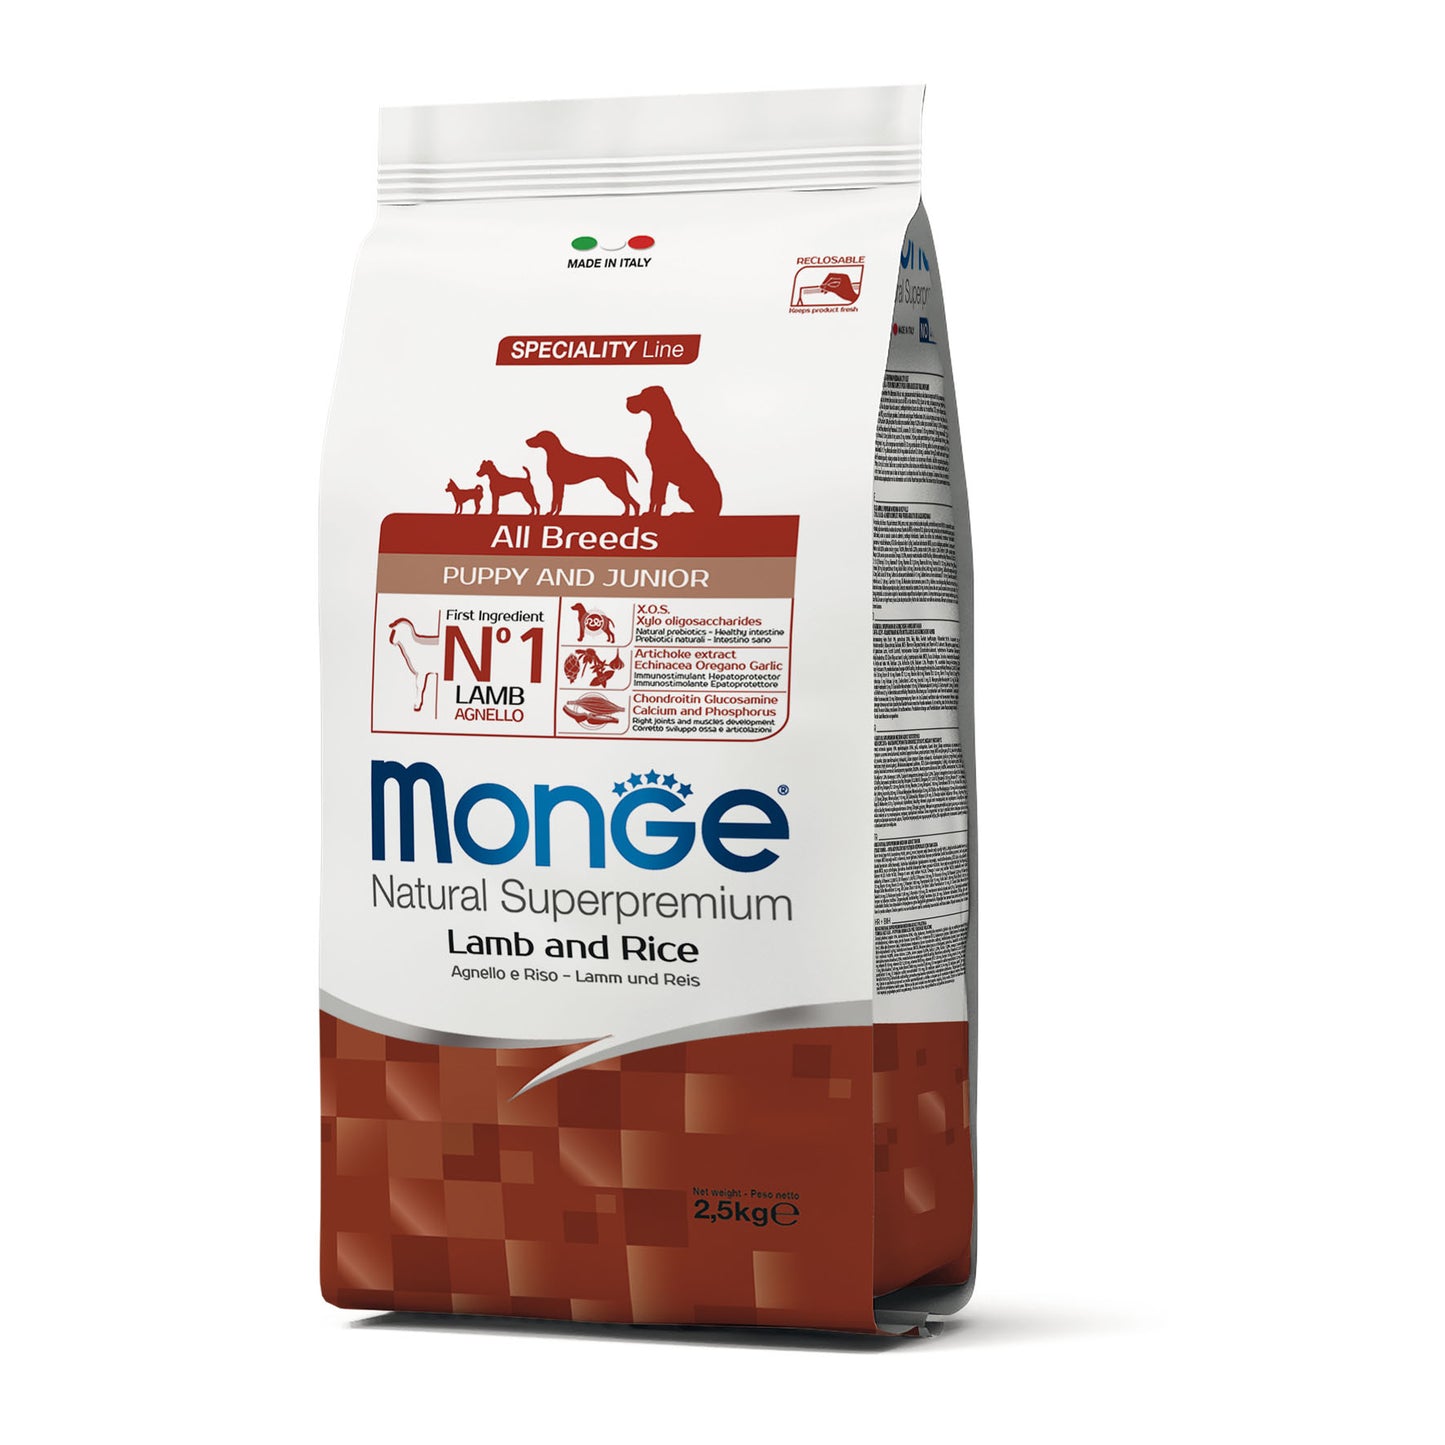 Monge Dog - SPECIALITY Line - Monoprotein - Puppy & Junior ALL BREEDS Lamb